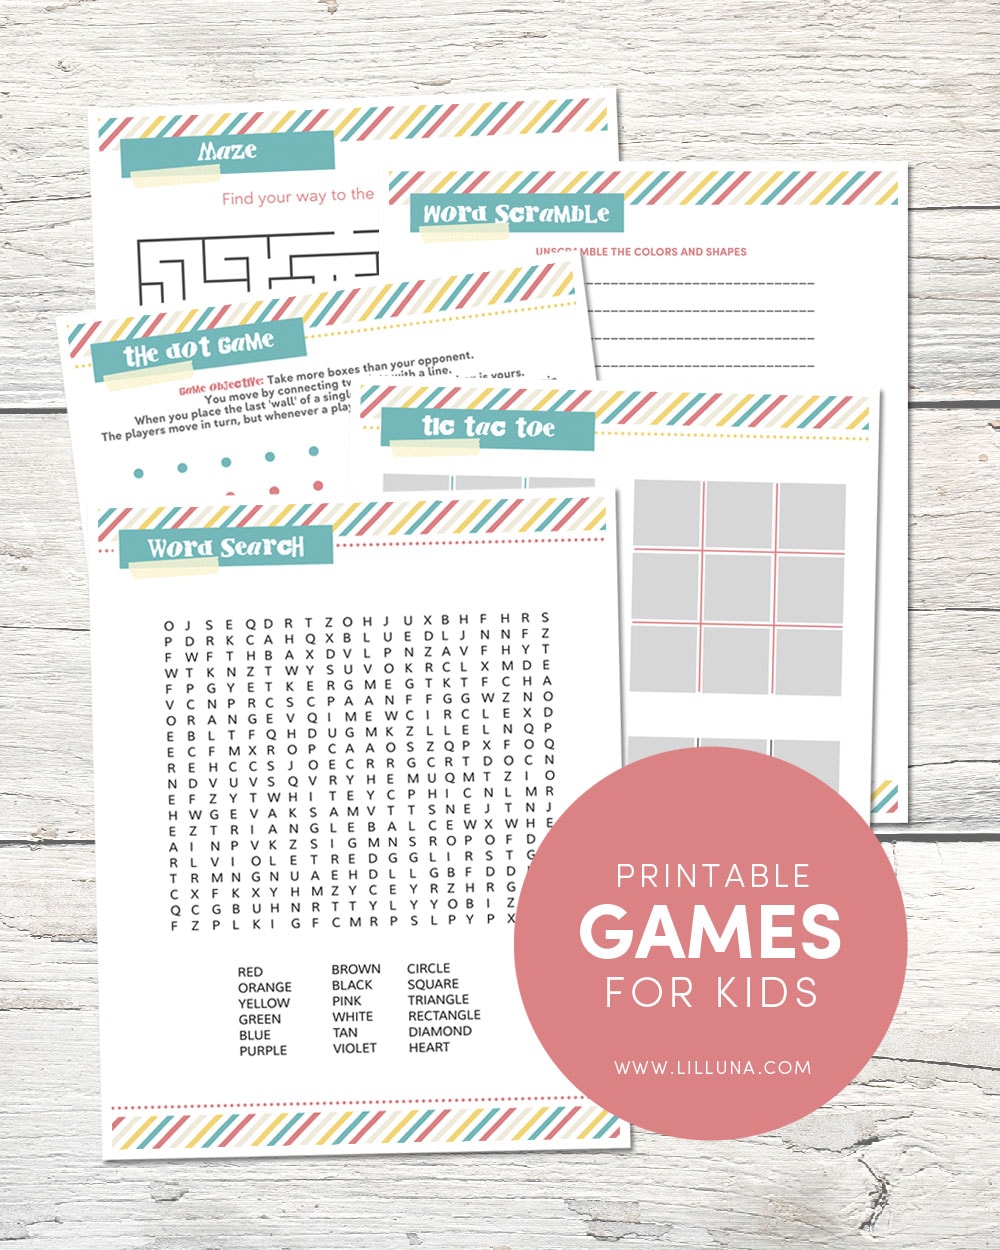 FREE Printable Games for Kids including a word search, maze, Tic Tac Toe, Dot game and word scramble game!